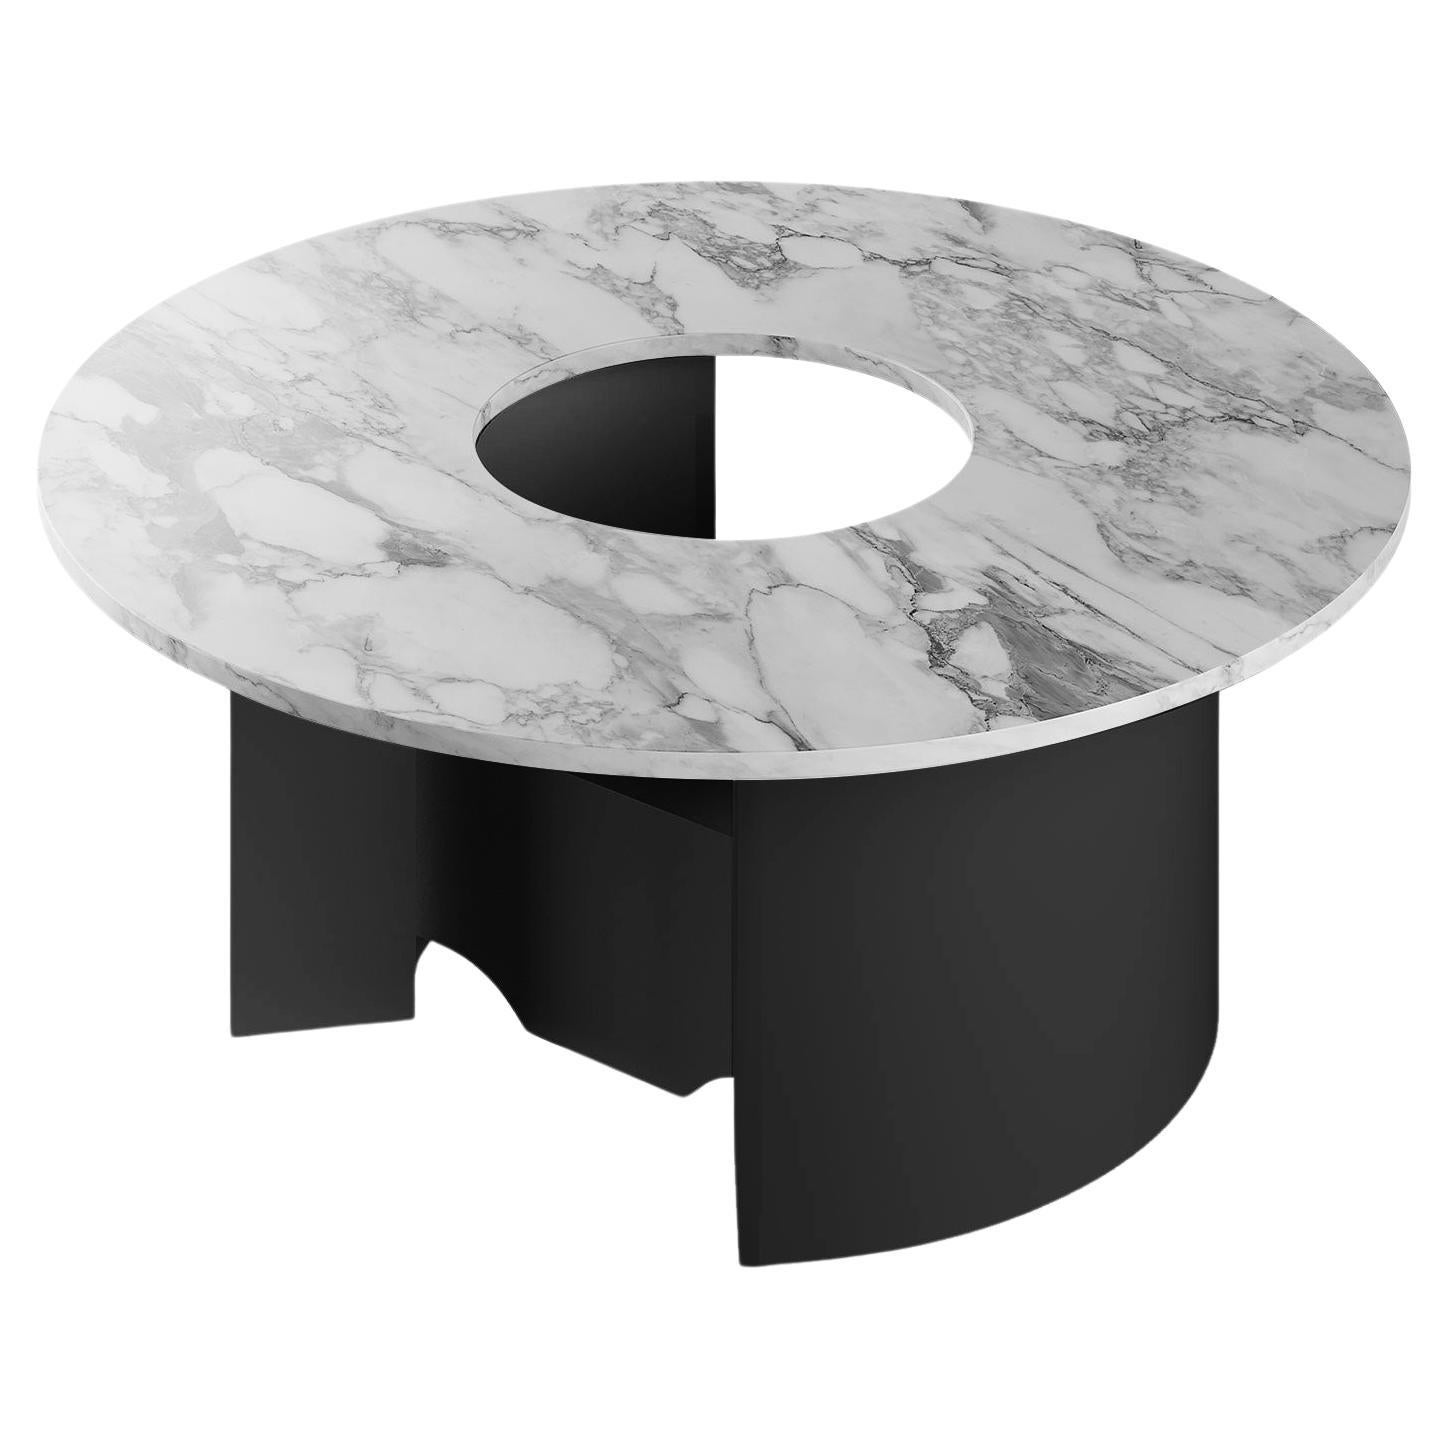 Minimal Modern Round Center Table Calacatta White Marble Top Black Matte Lacquer For Sale